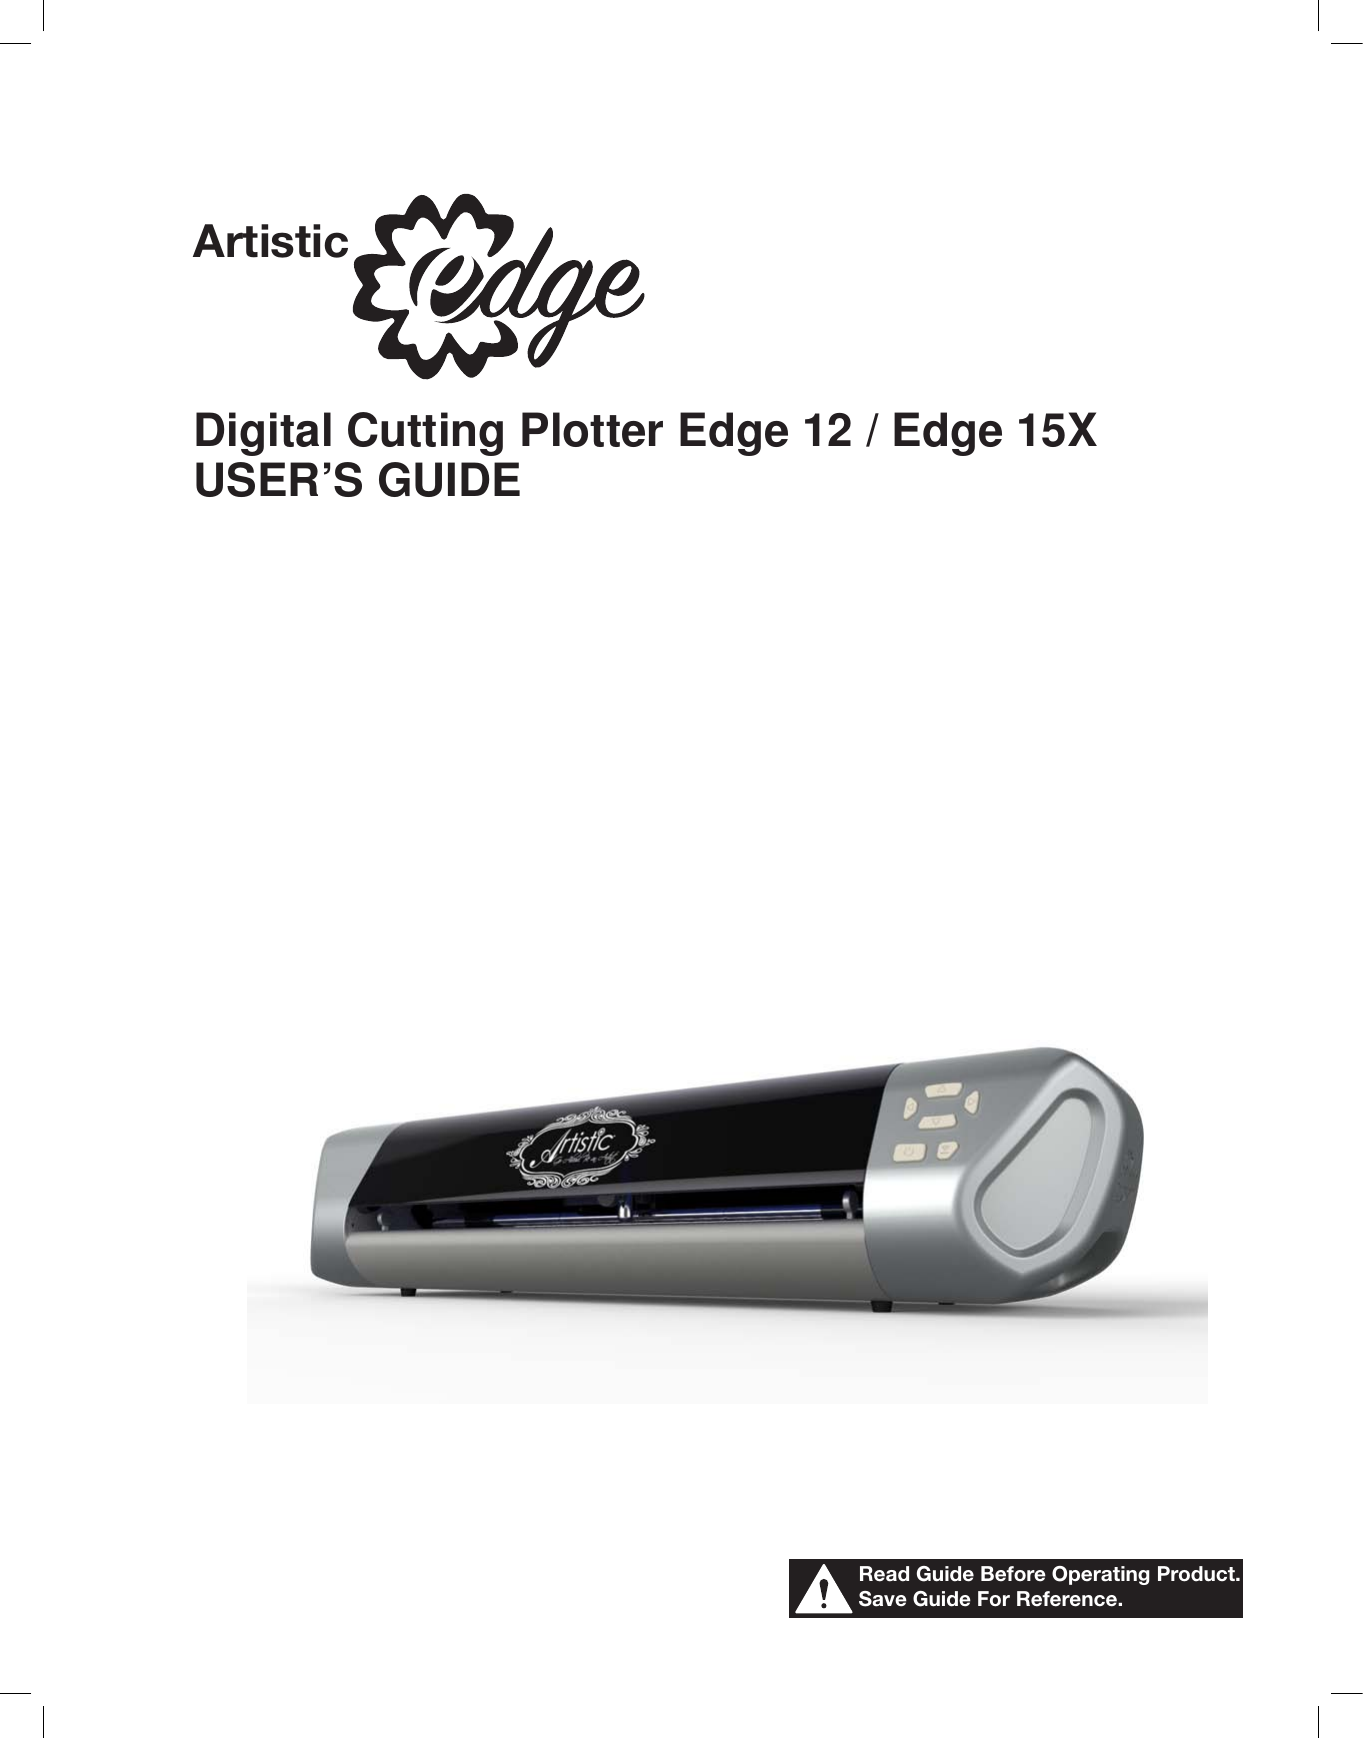 Digital Cutting Plotter Edge 12 / Edge 15XUSER’S GUIDERead Guide Before Operating Product.Save Guide For Reference.Artistic